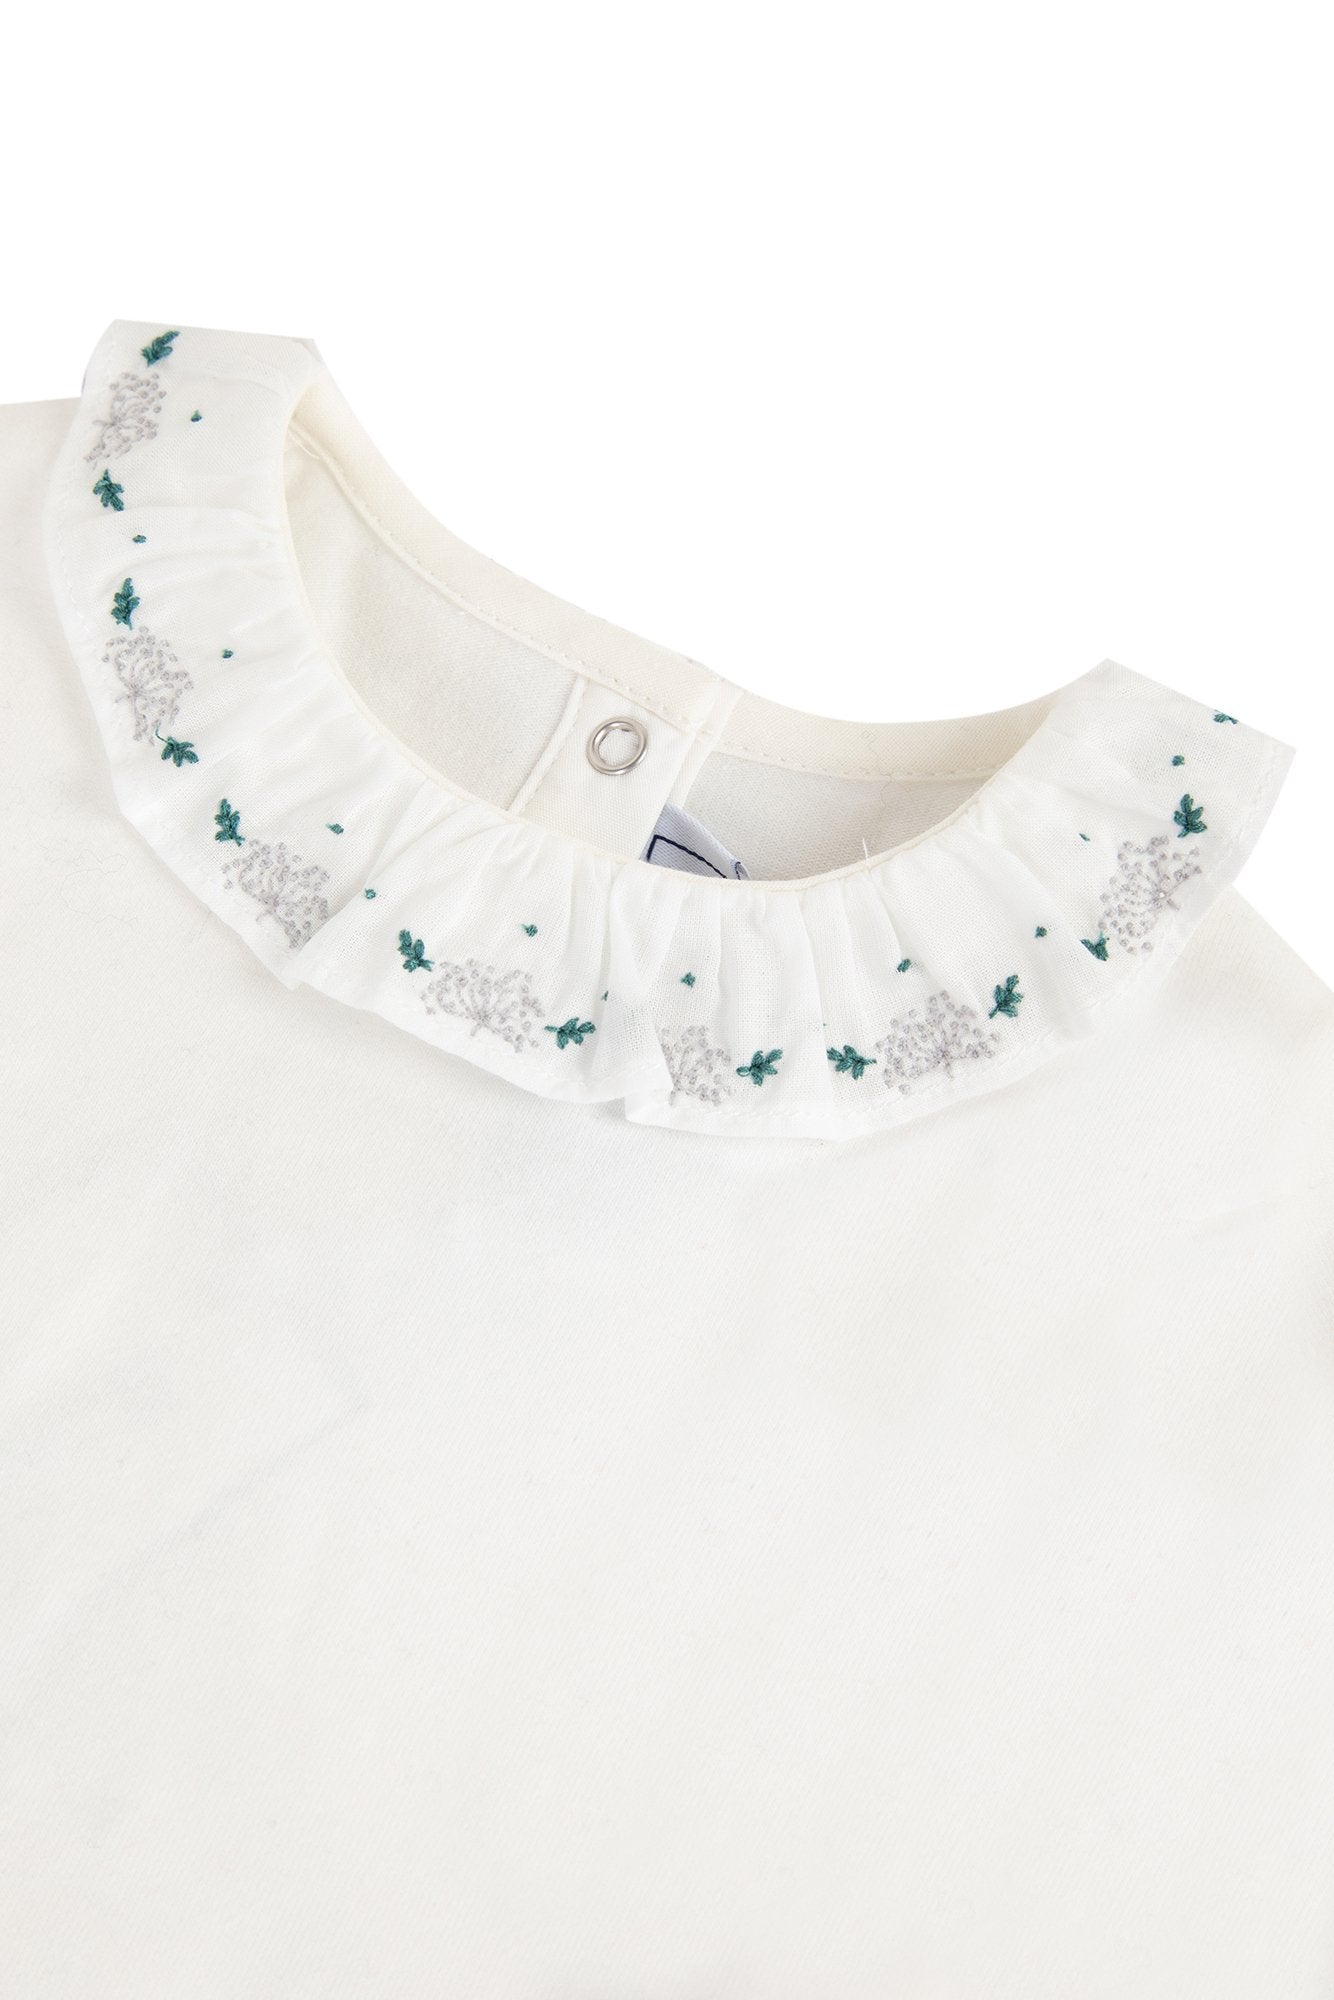 Bodysuit - Pale green with ruffled collar and floral embroidery - Tartine Et Chocolat